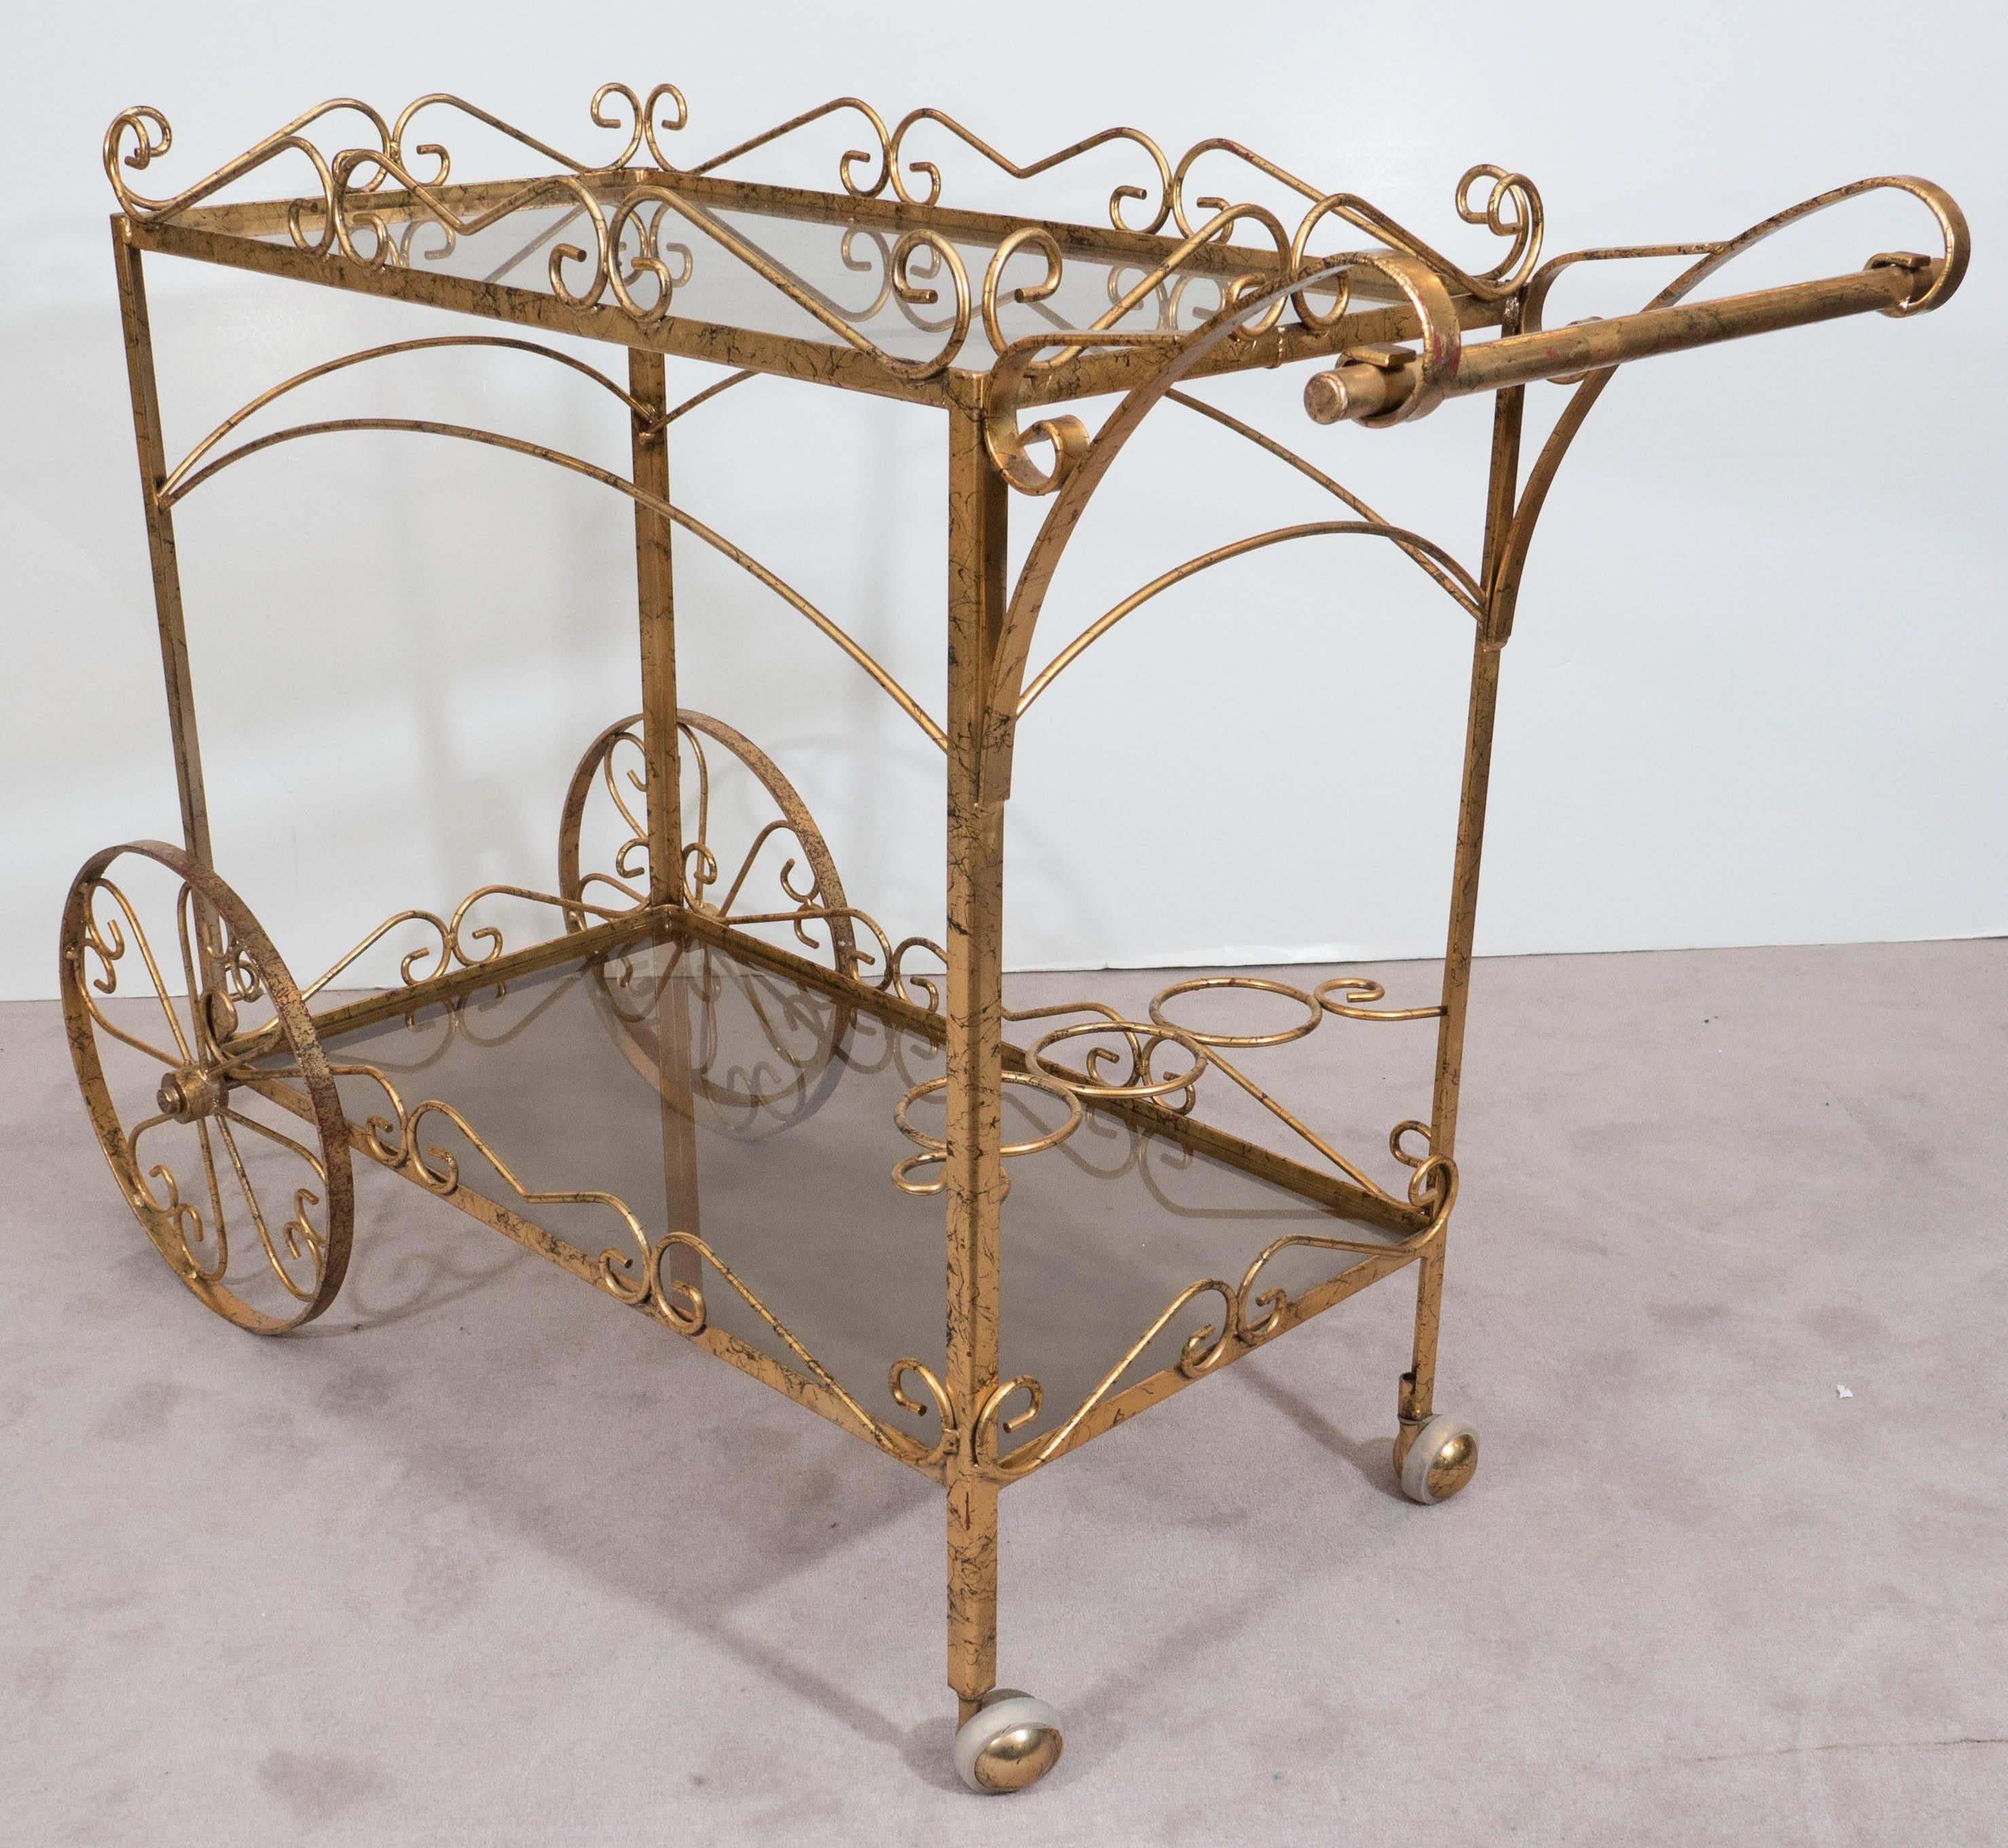 A vintage bar cart, with beautiful scrollwork frame in gilded metal, including two shelves of smoked glass and three bottle holders, on caster and spoke wheels. Very good vintage condition, with age appropriate wear to the gilt finish.